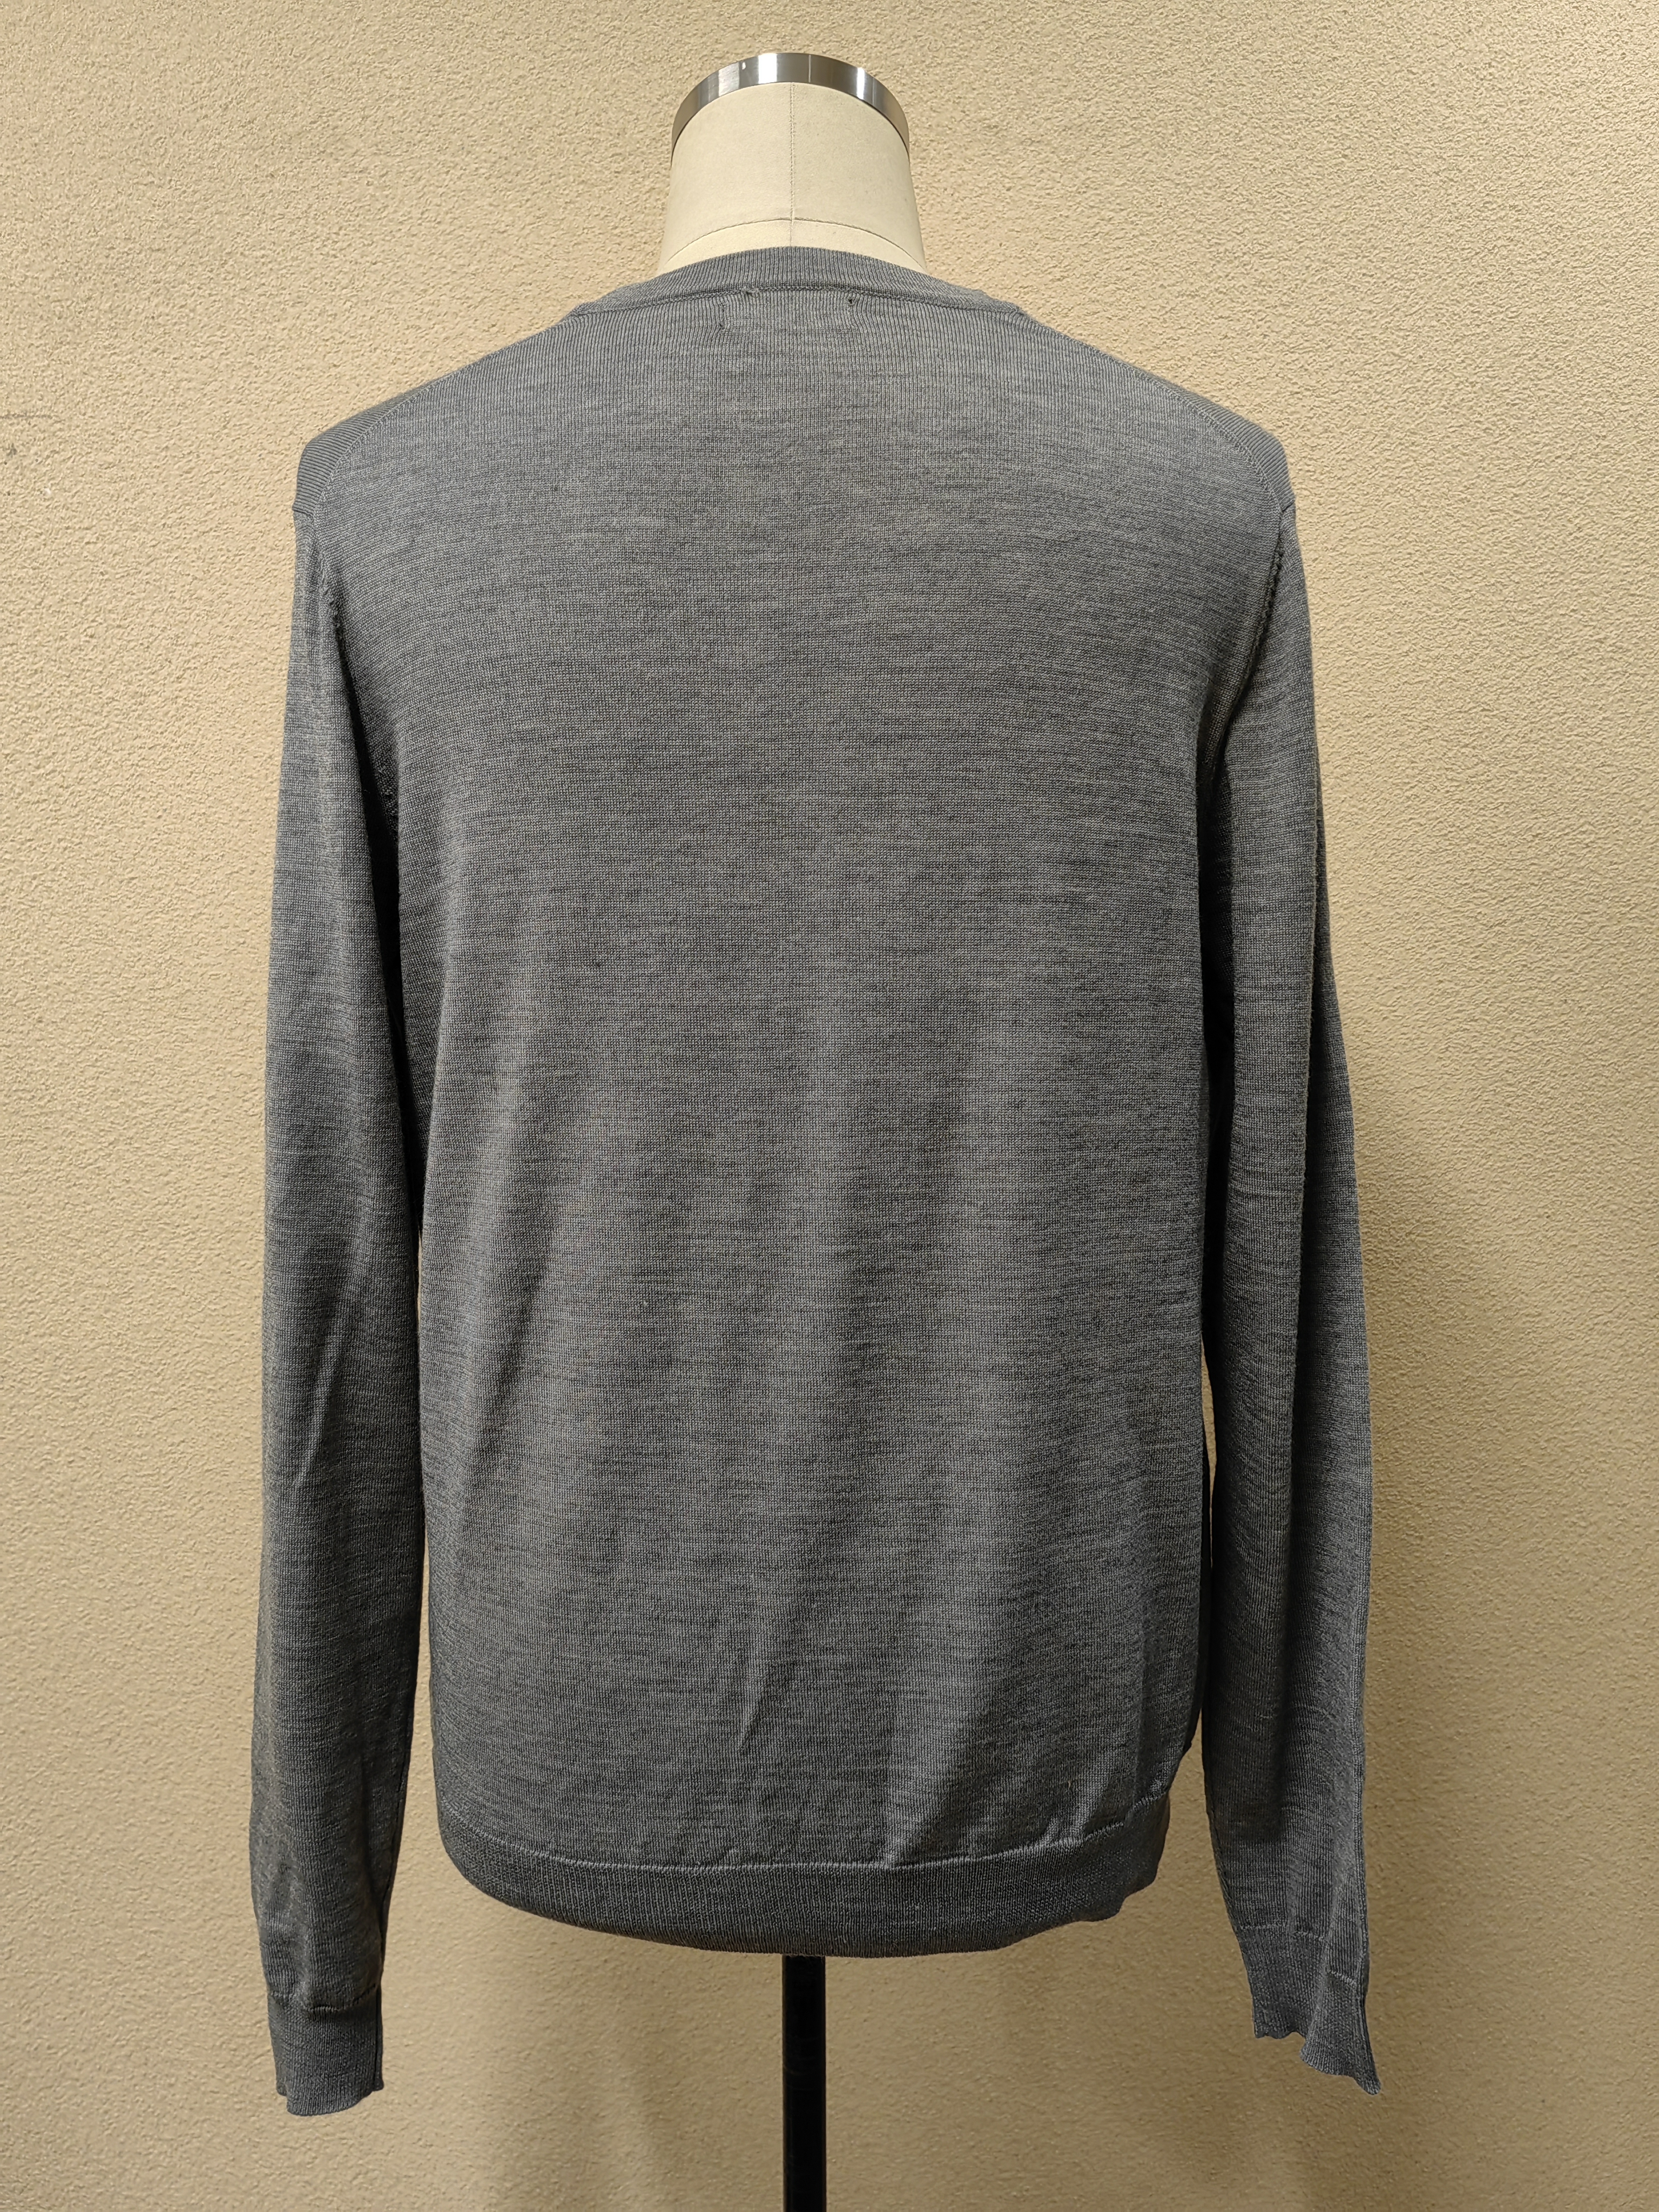 Factory Wholesale Grey Hand Knitted Wool Plain Long Sleeve Men's Hollow Sweater Single Breasted